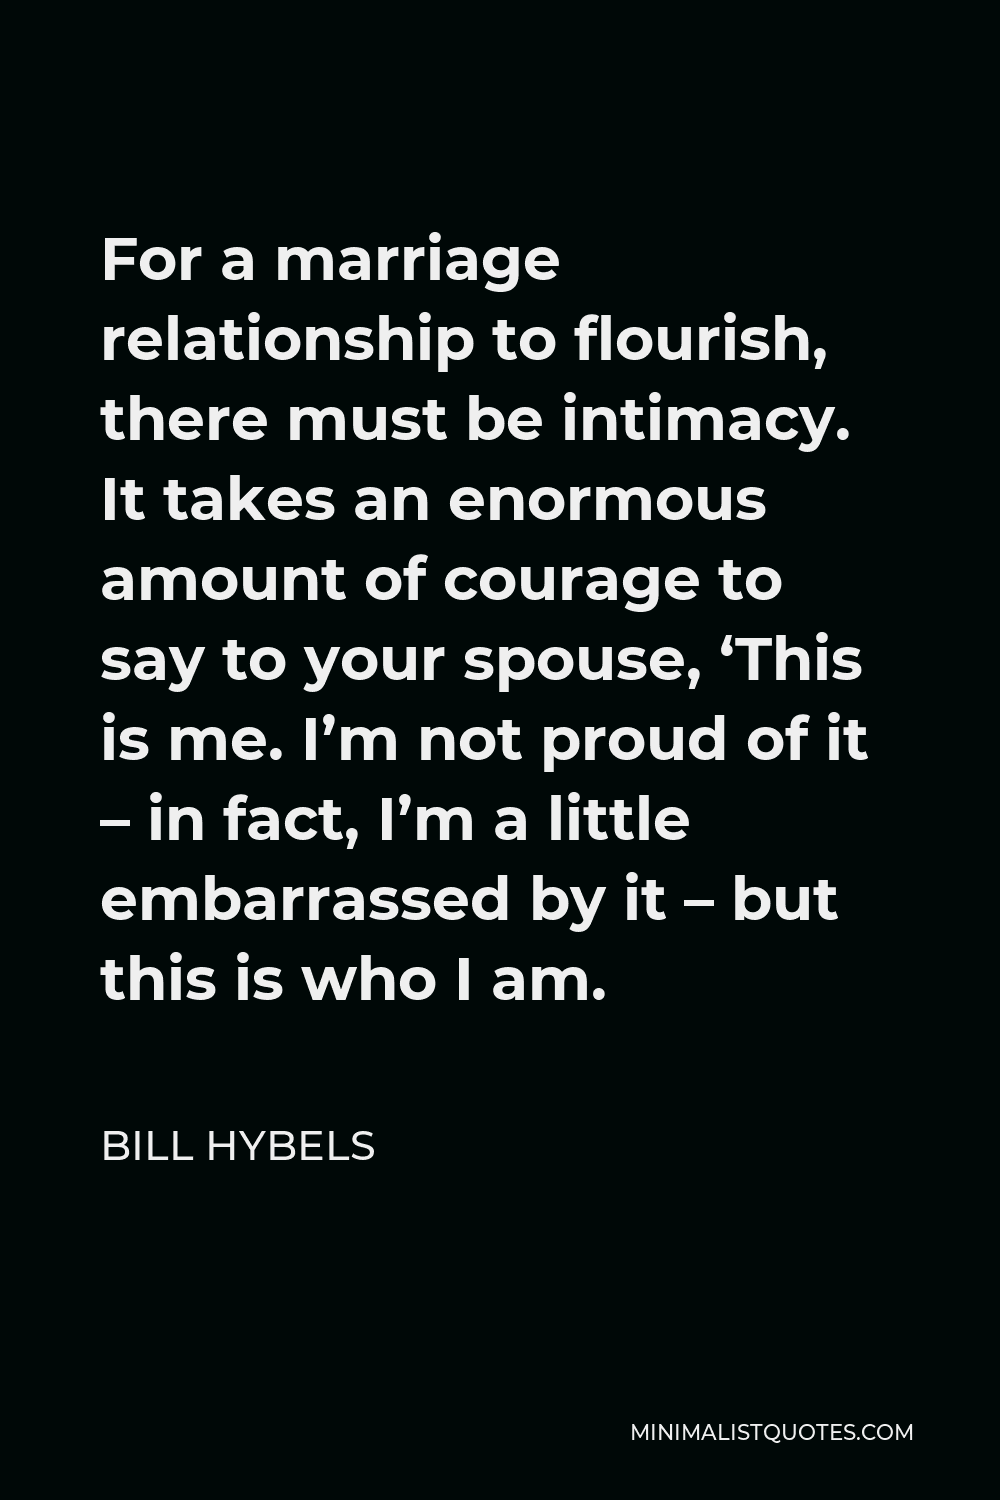 Bill Hybels Quote - For a marriage relationship to flourish, there must be intimacy. It takes an enormous amount of courage to say to your spouse, ‘This is me. I’m not proud of it – in fact, I’m a little embarrassed by it – but this is who I am.